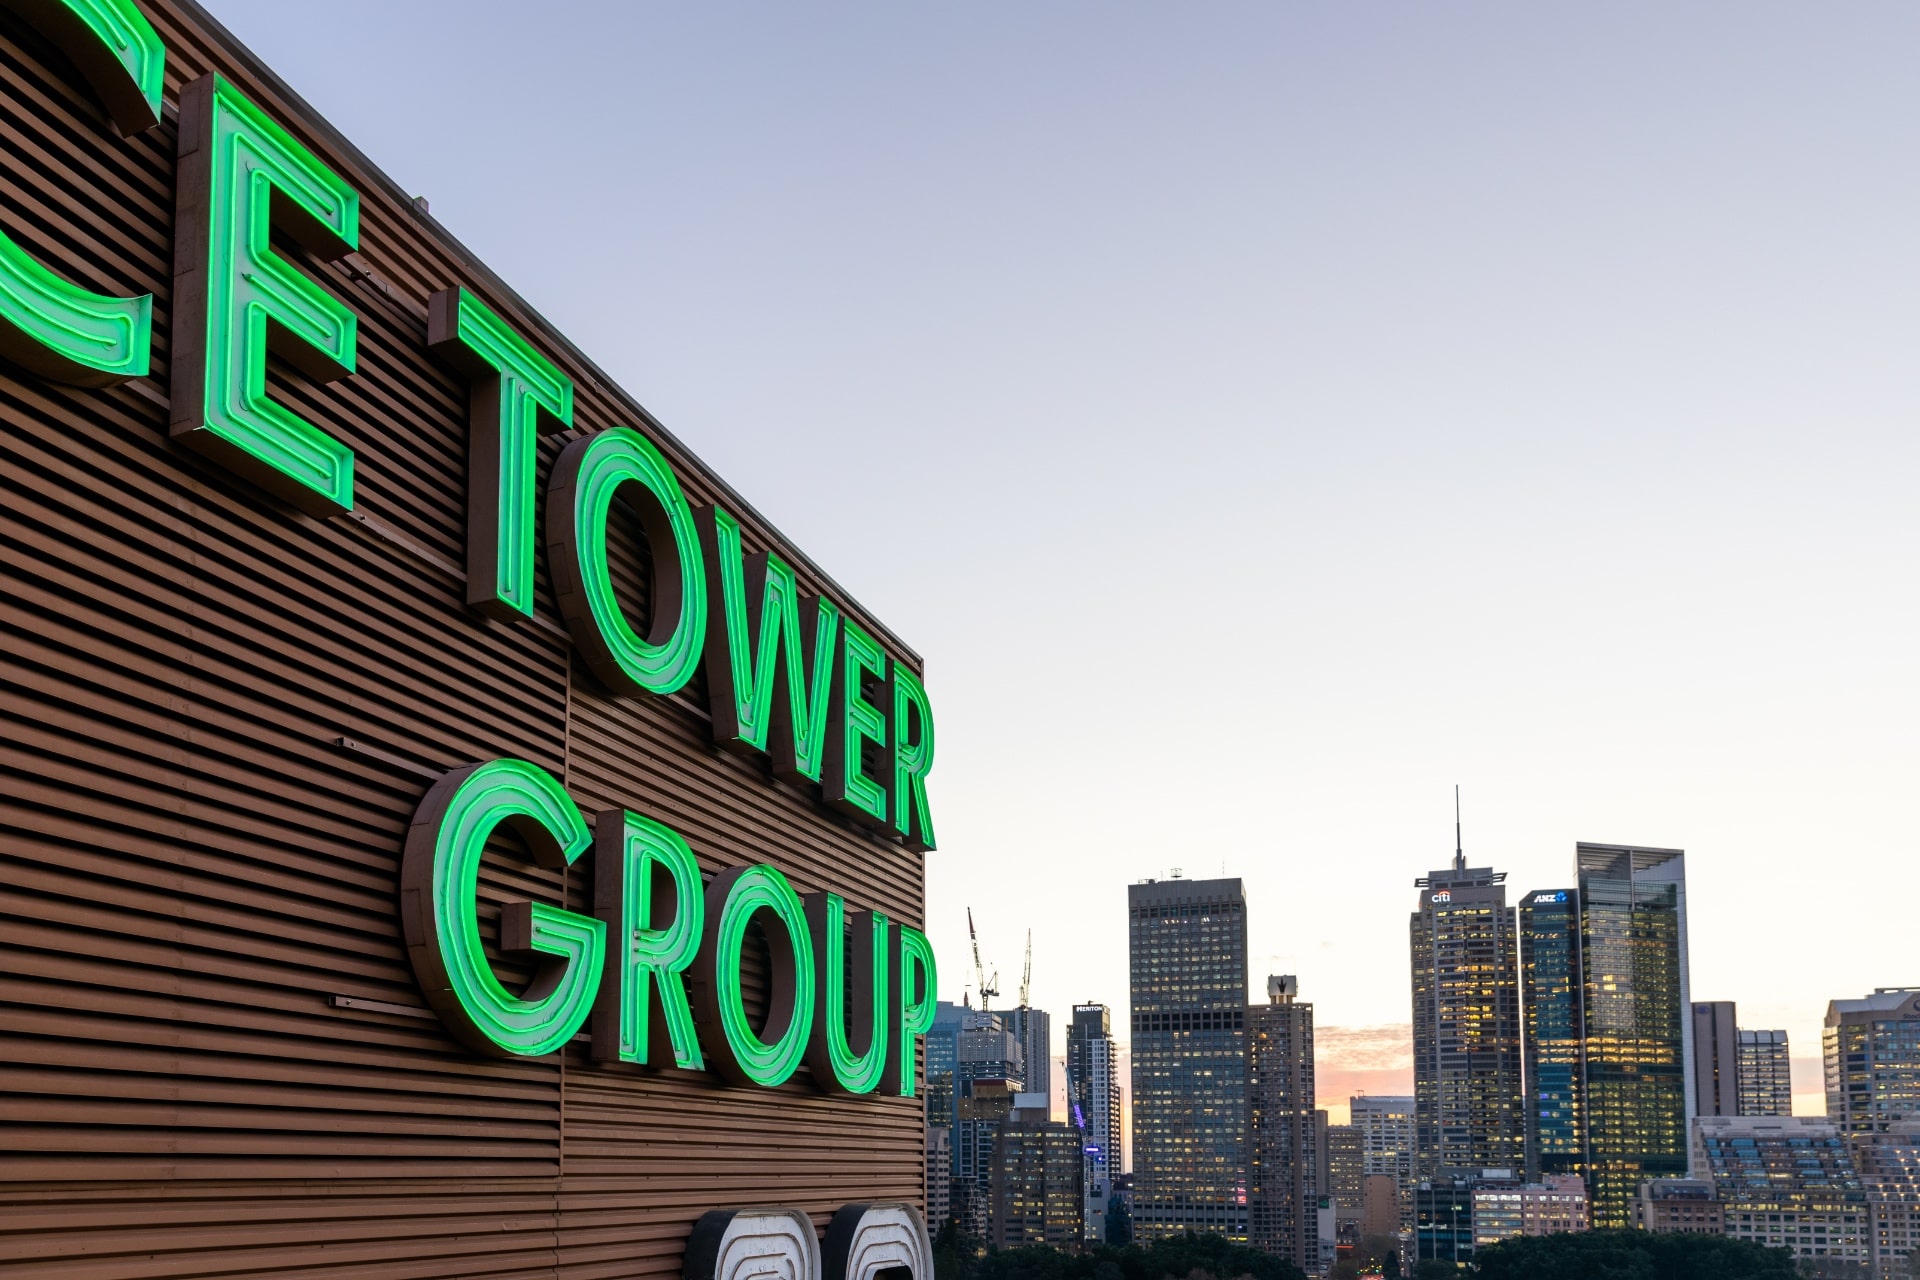 Terrace Tower Group